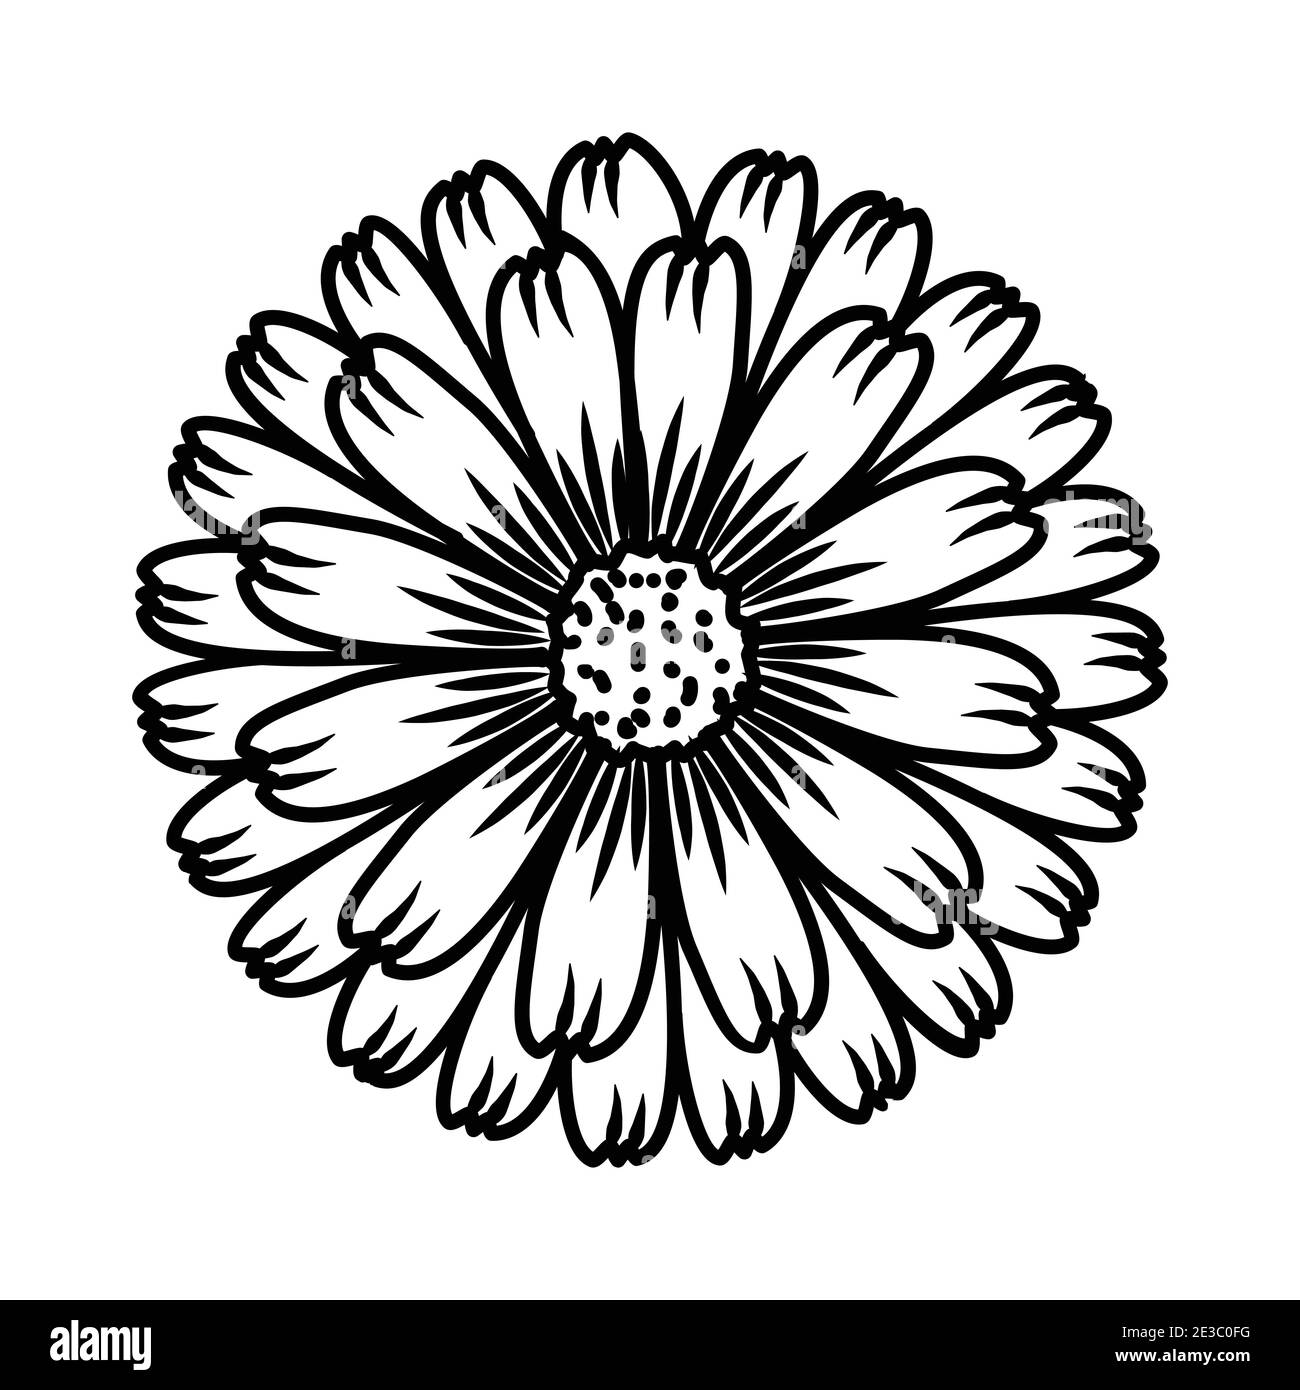 Drawing marigold flower decorative plant Vector Image